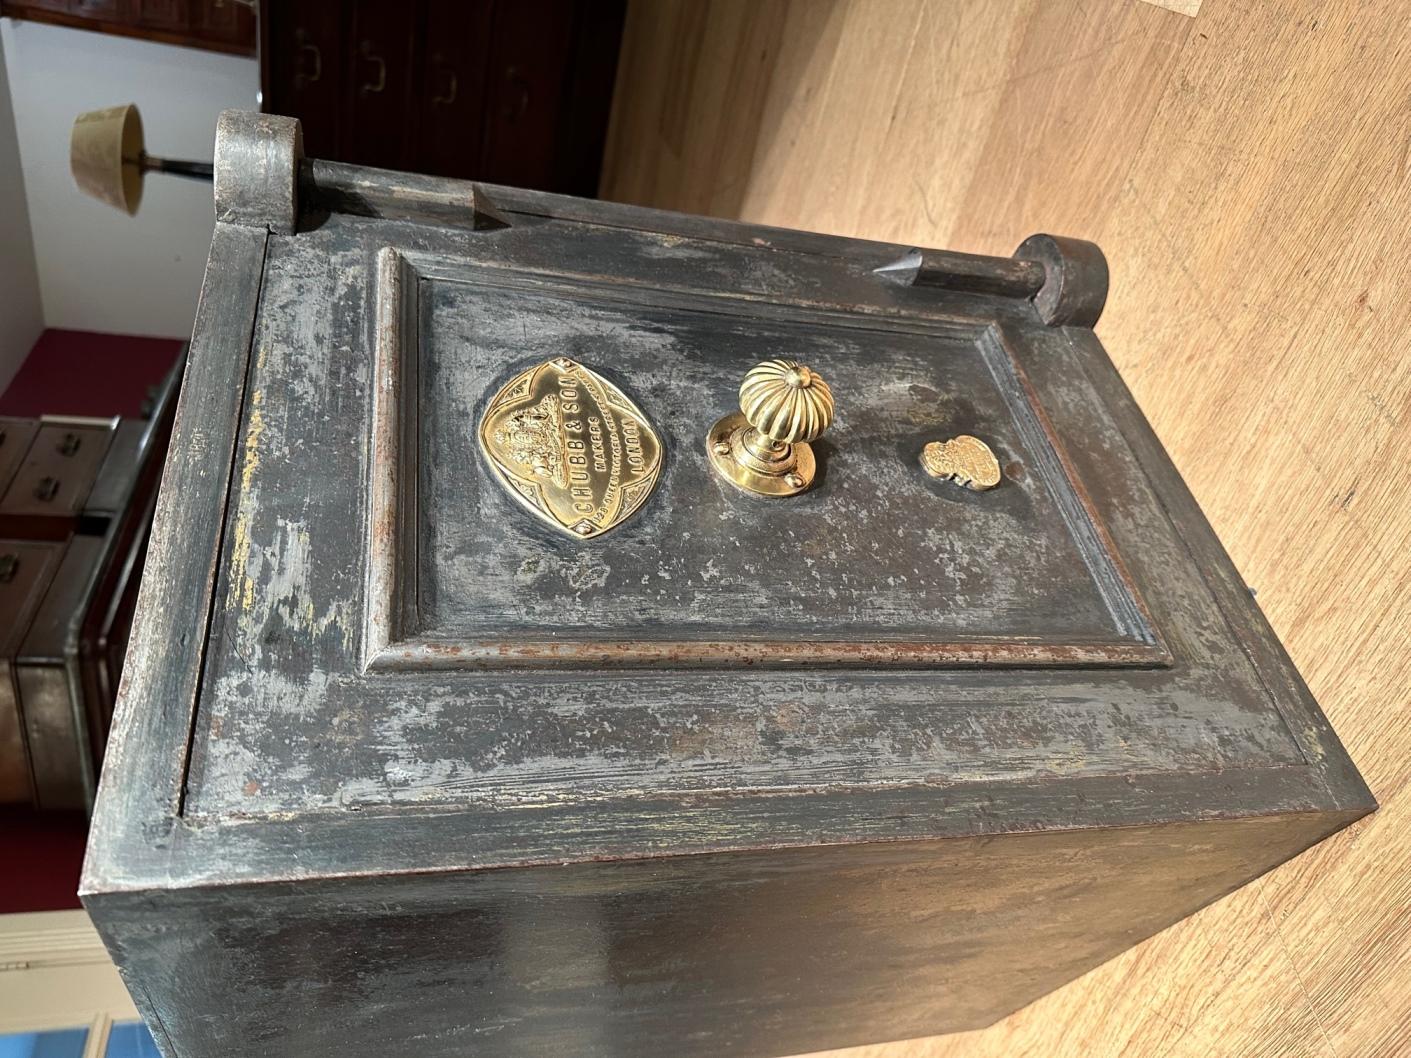 Beautiful antique safe in good and functioning condition. Door and drawer keys present. Beautiful details in knob and key plate. The safe is heavy and therefore also suitable for use as a safe. The Maker Chubb & Son from London was established in